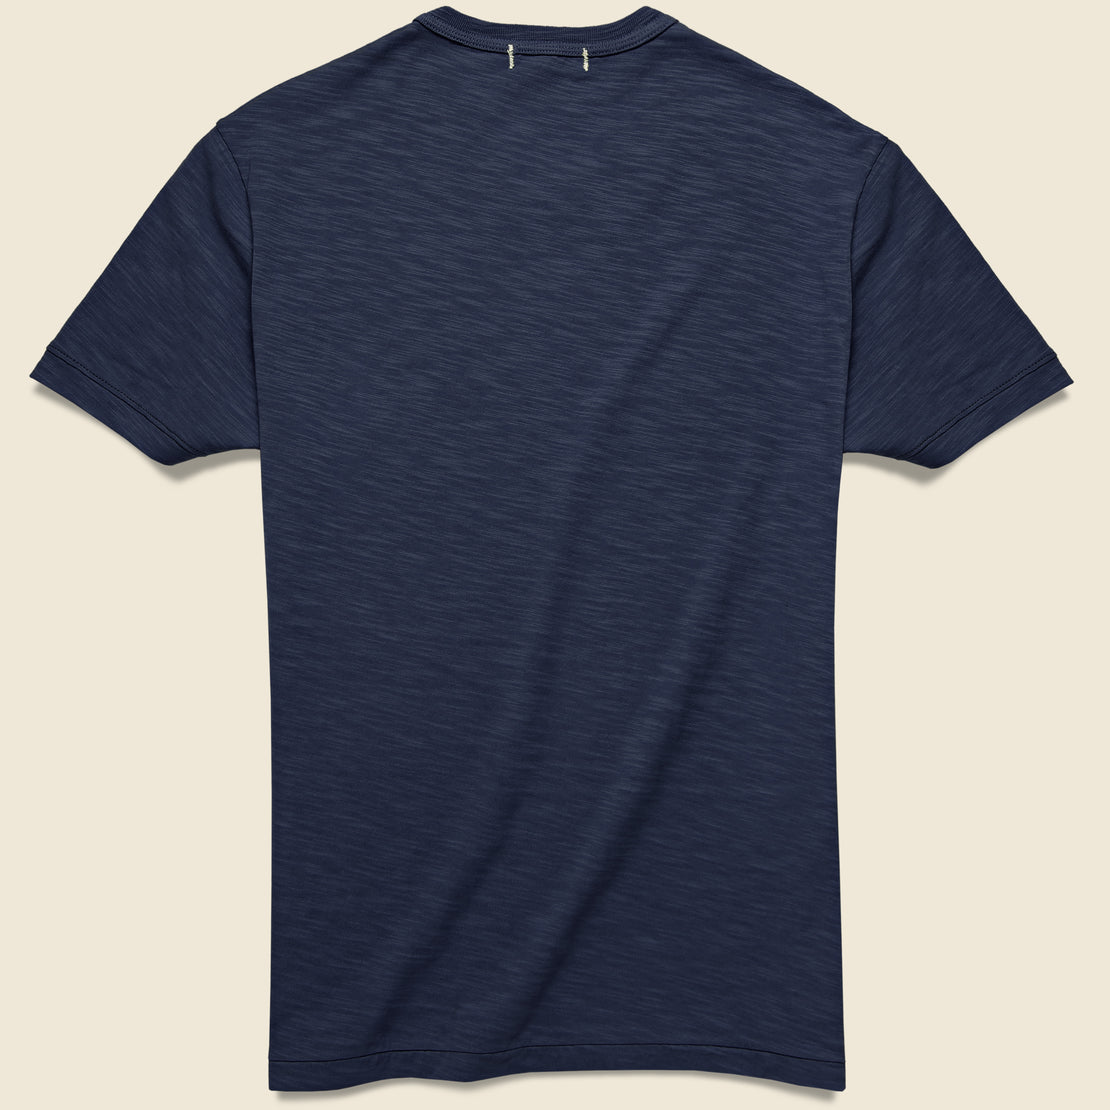 Standard Crew Tee - Navy - Alex Mill - STAG Provisions - Tops - S/S Tee